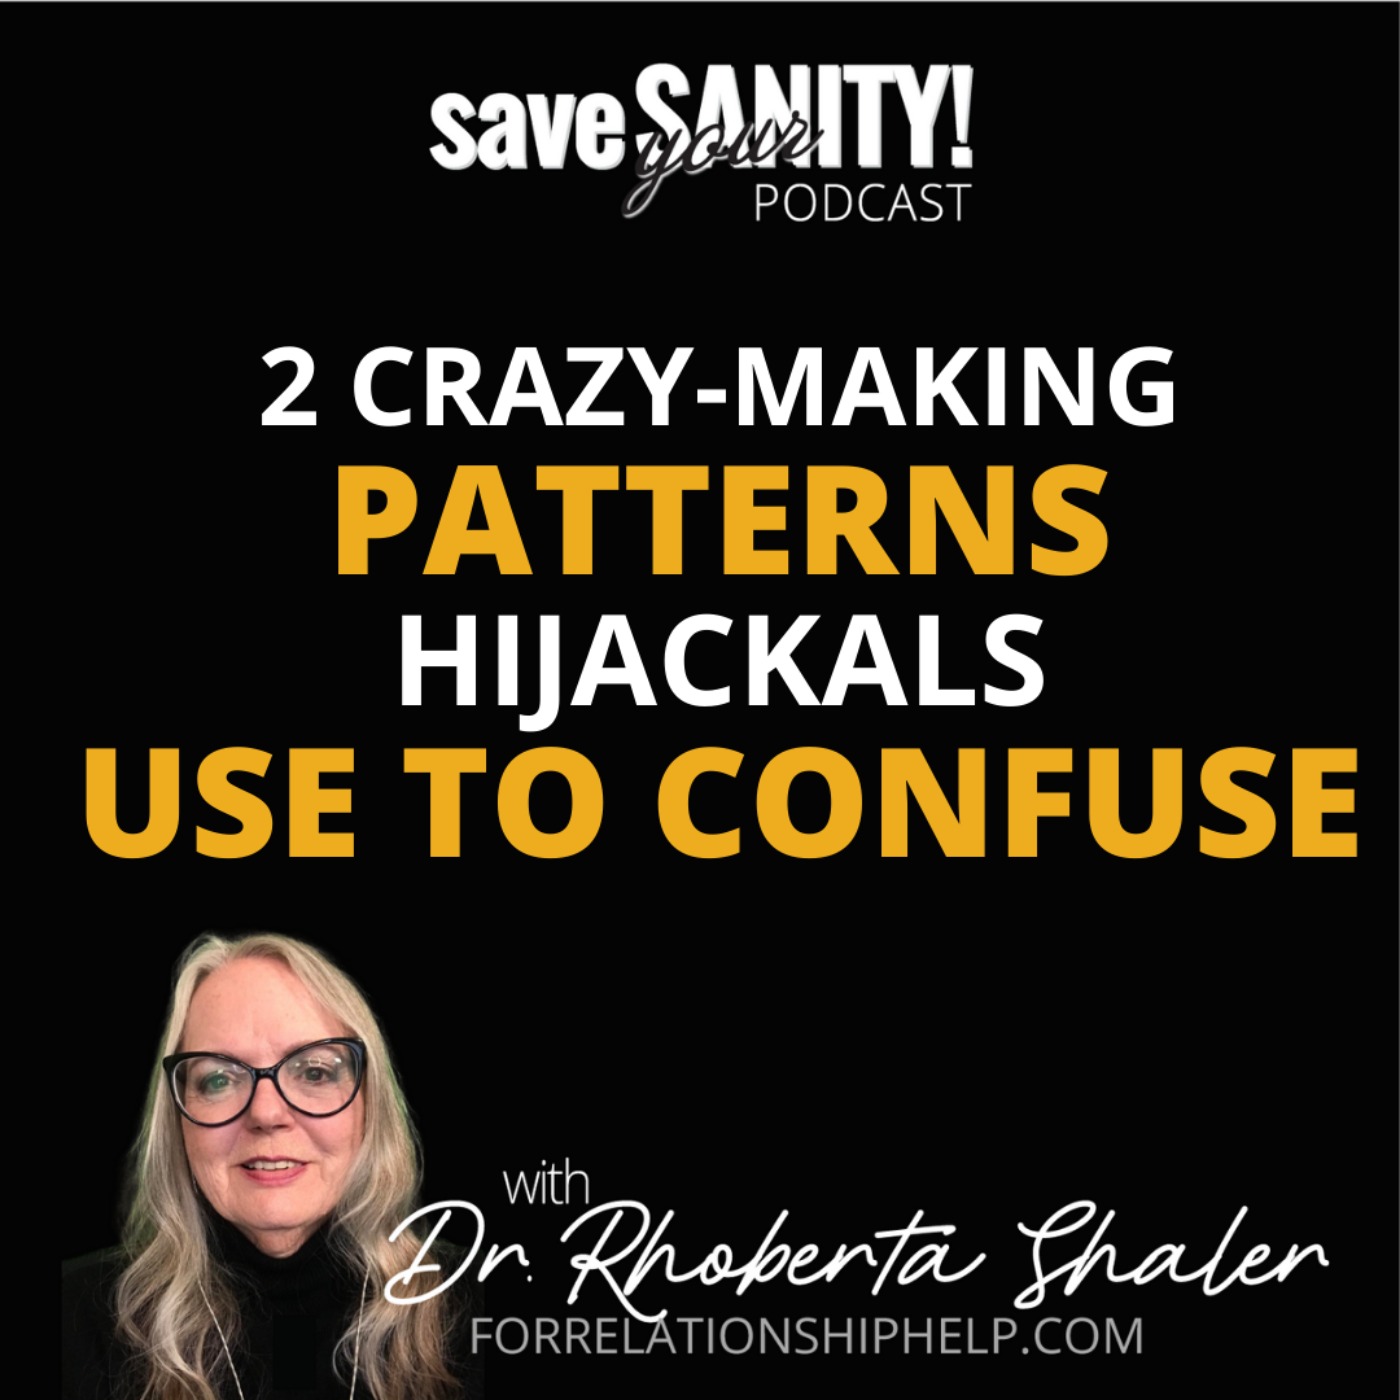 2 Crazy-Making Patterns Hijackals Use to Confuse